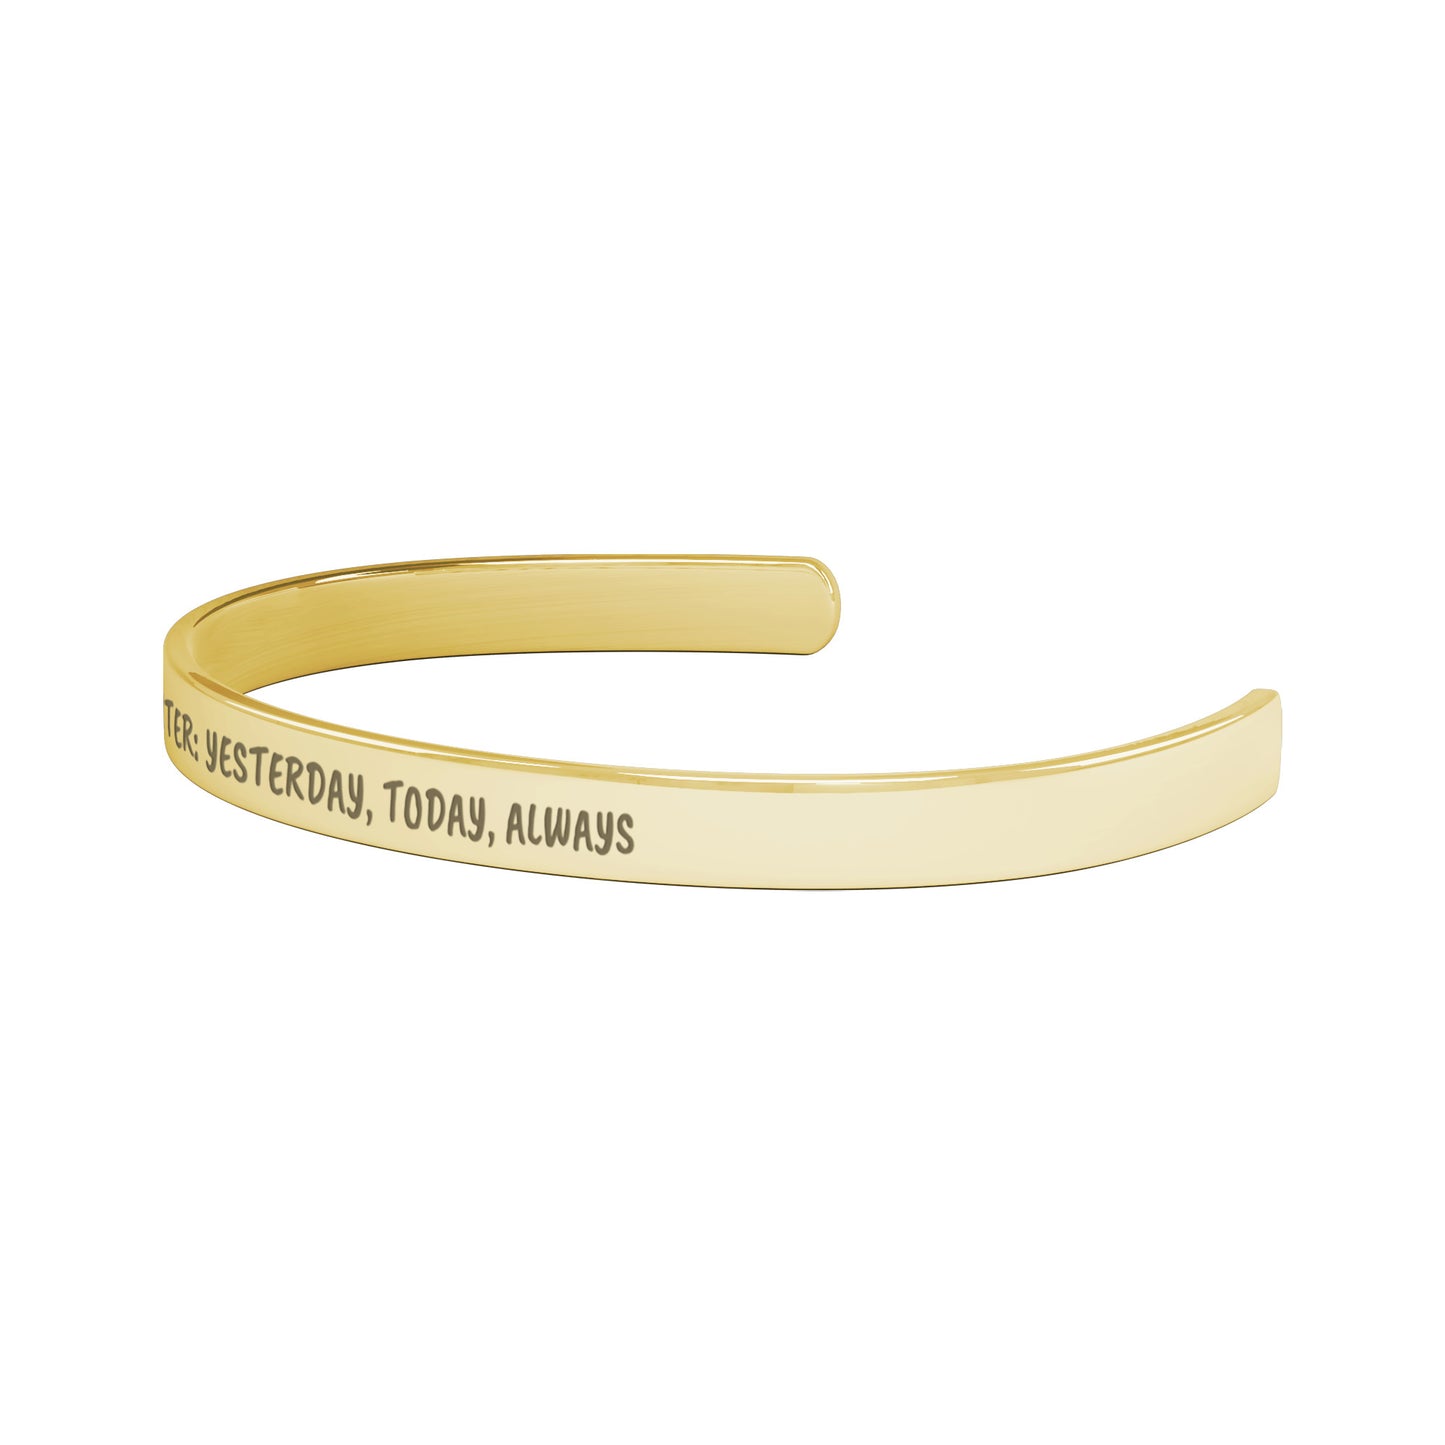 Gift For Daughter | Daughter: Yesterday, Today, Always Cuff Bracelet